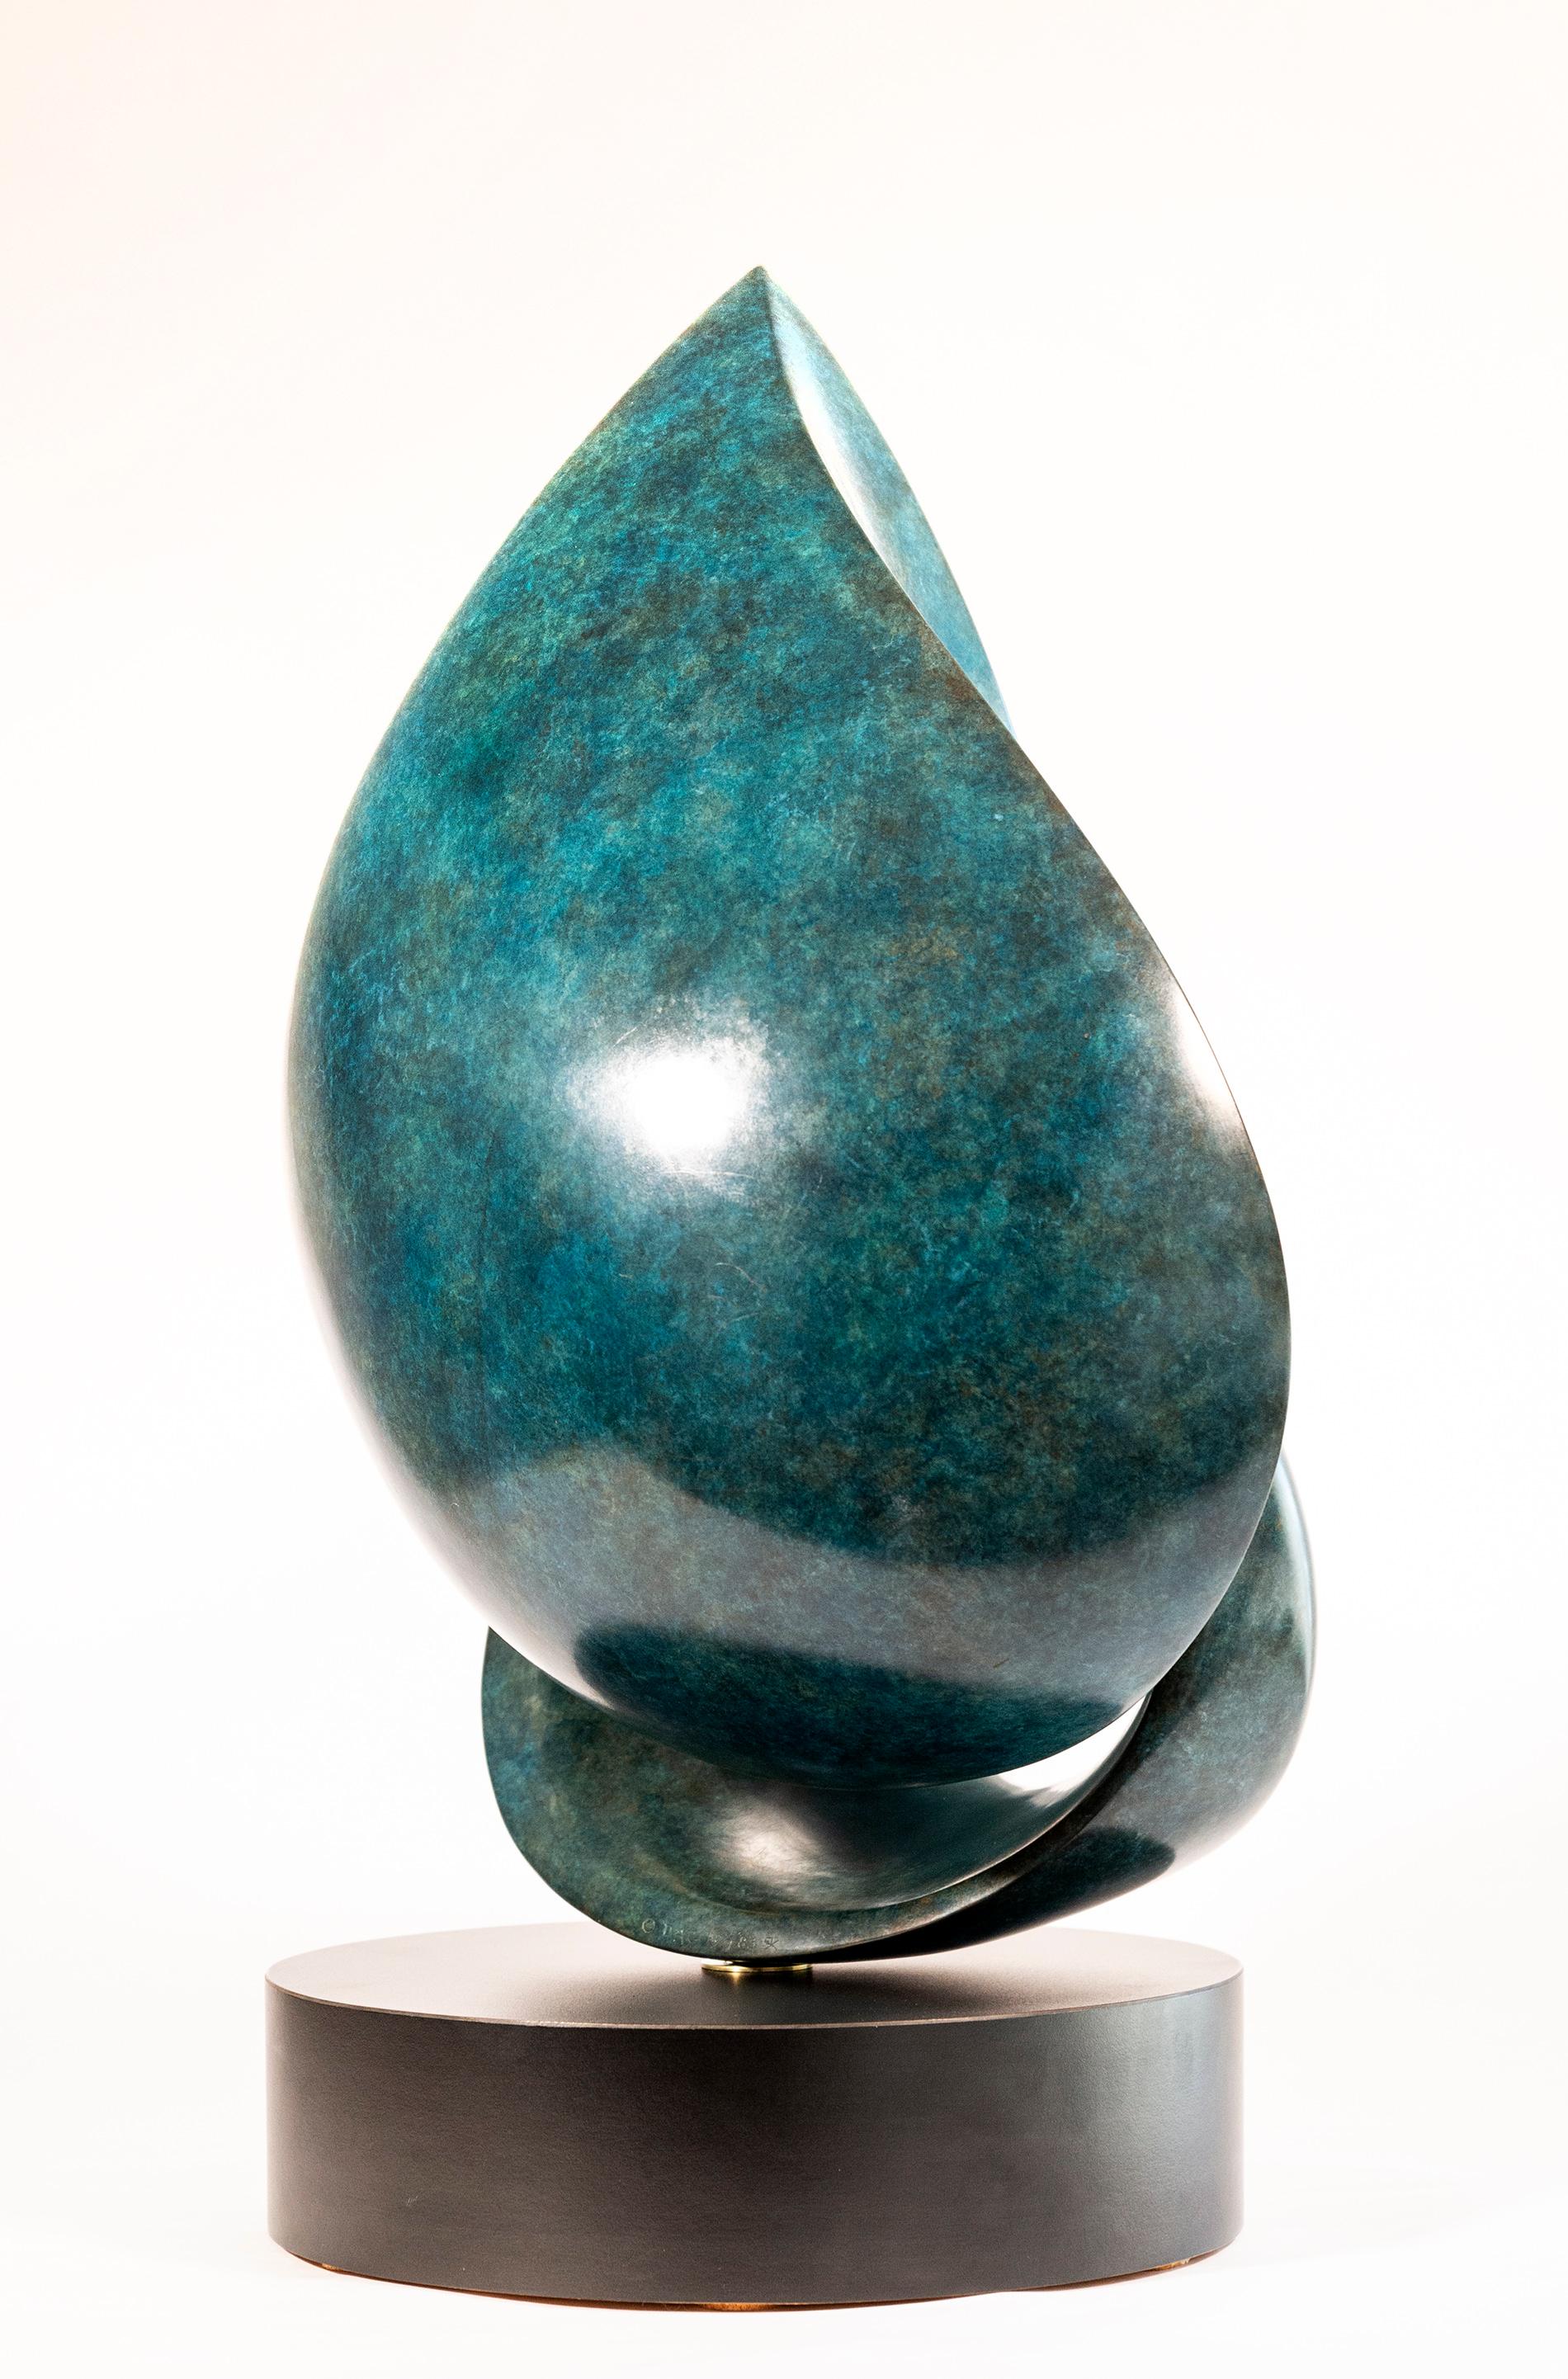 Eroica A.P. 1 - smooth, polished, abstract, contemporary, bronze sculpture - Abstract Sculpture by David Chamberlain